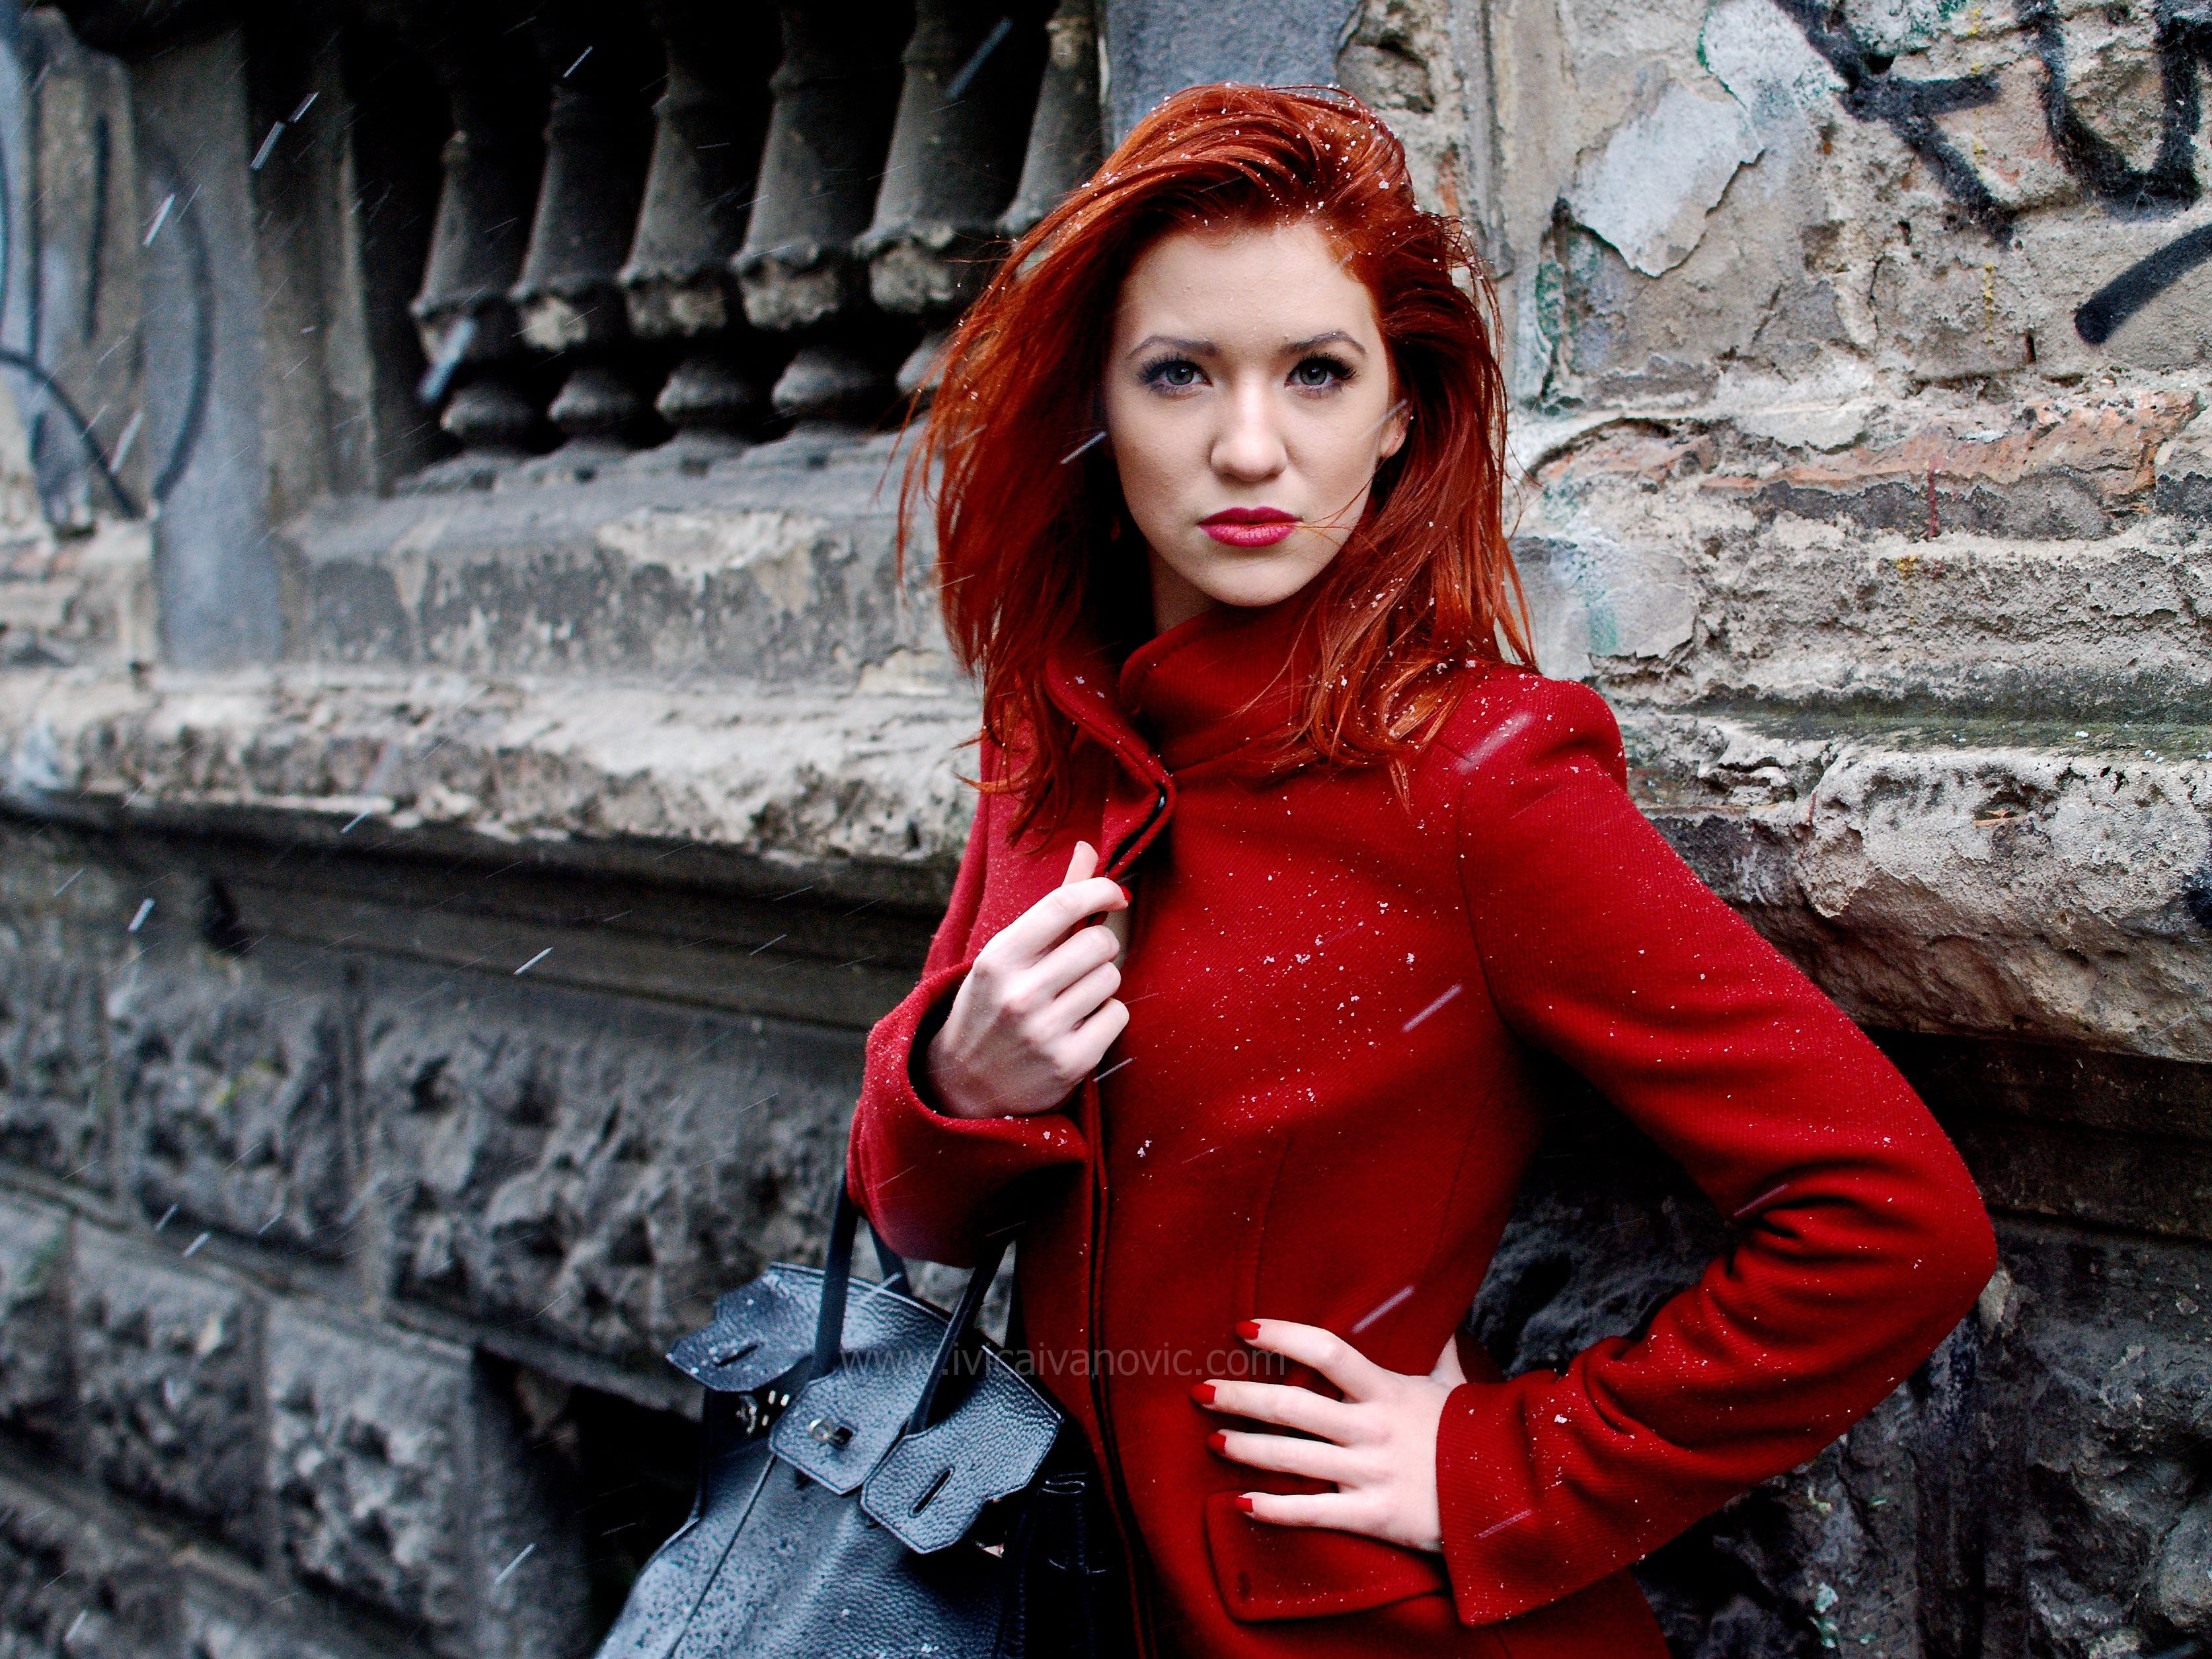 Model, portrait, beauty, red hair, red coat, fashion, red lips, strong woman